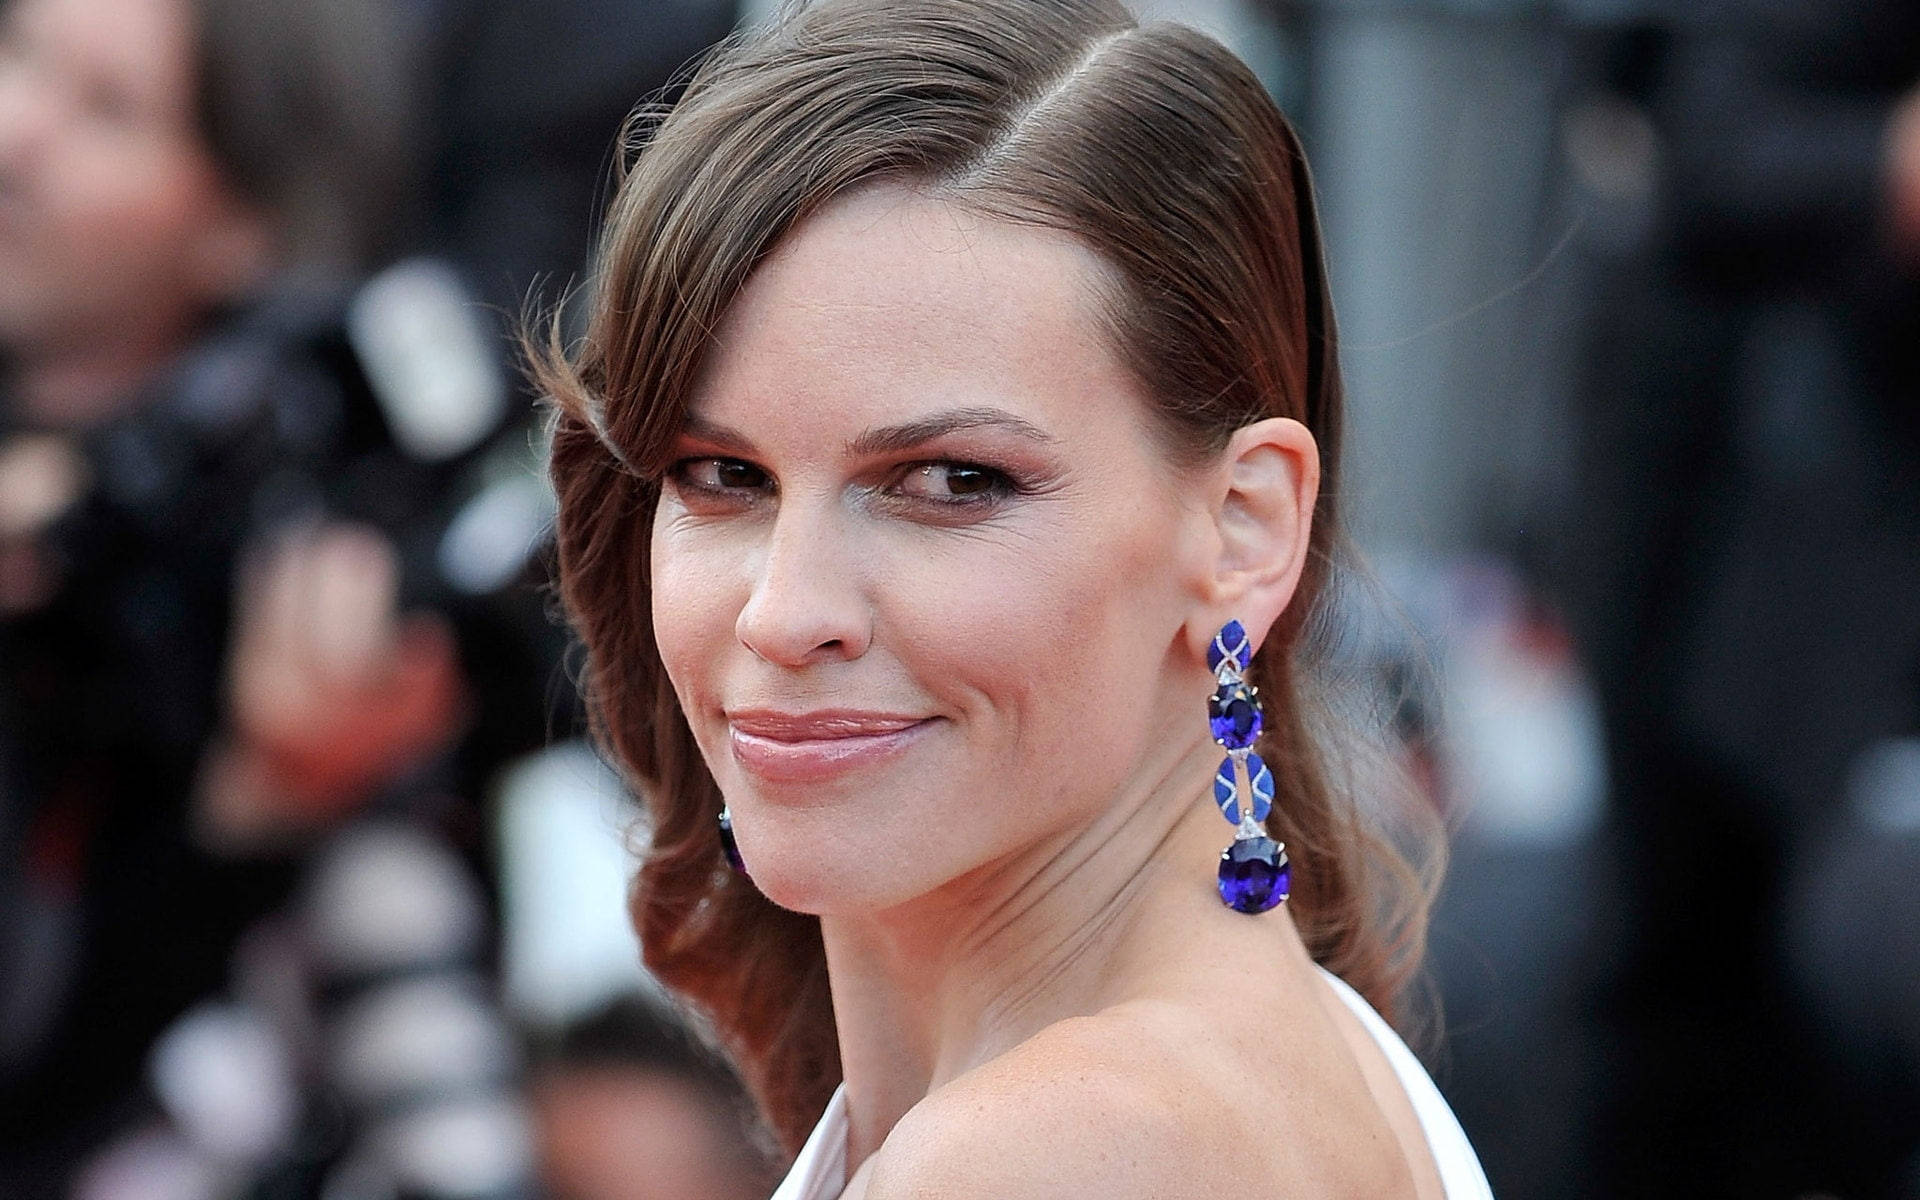 Hilary Swank Shines At The 67th Annual Cannes Film Festival Background